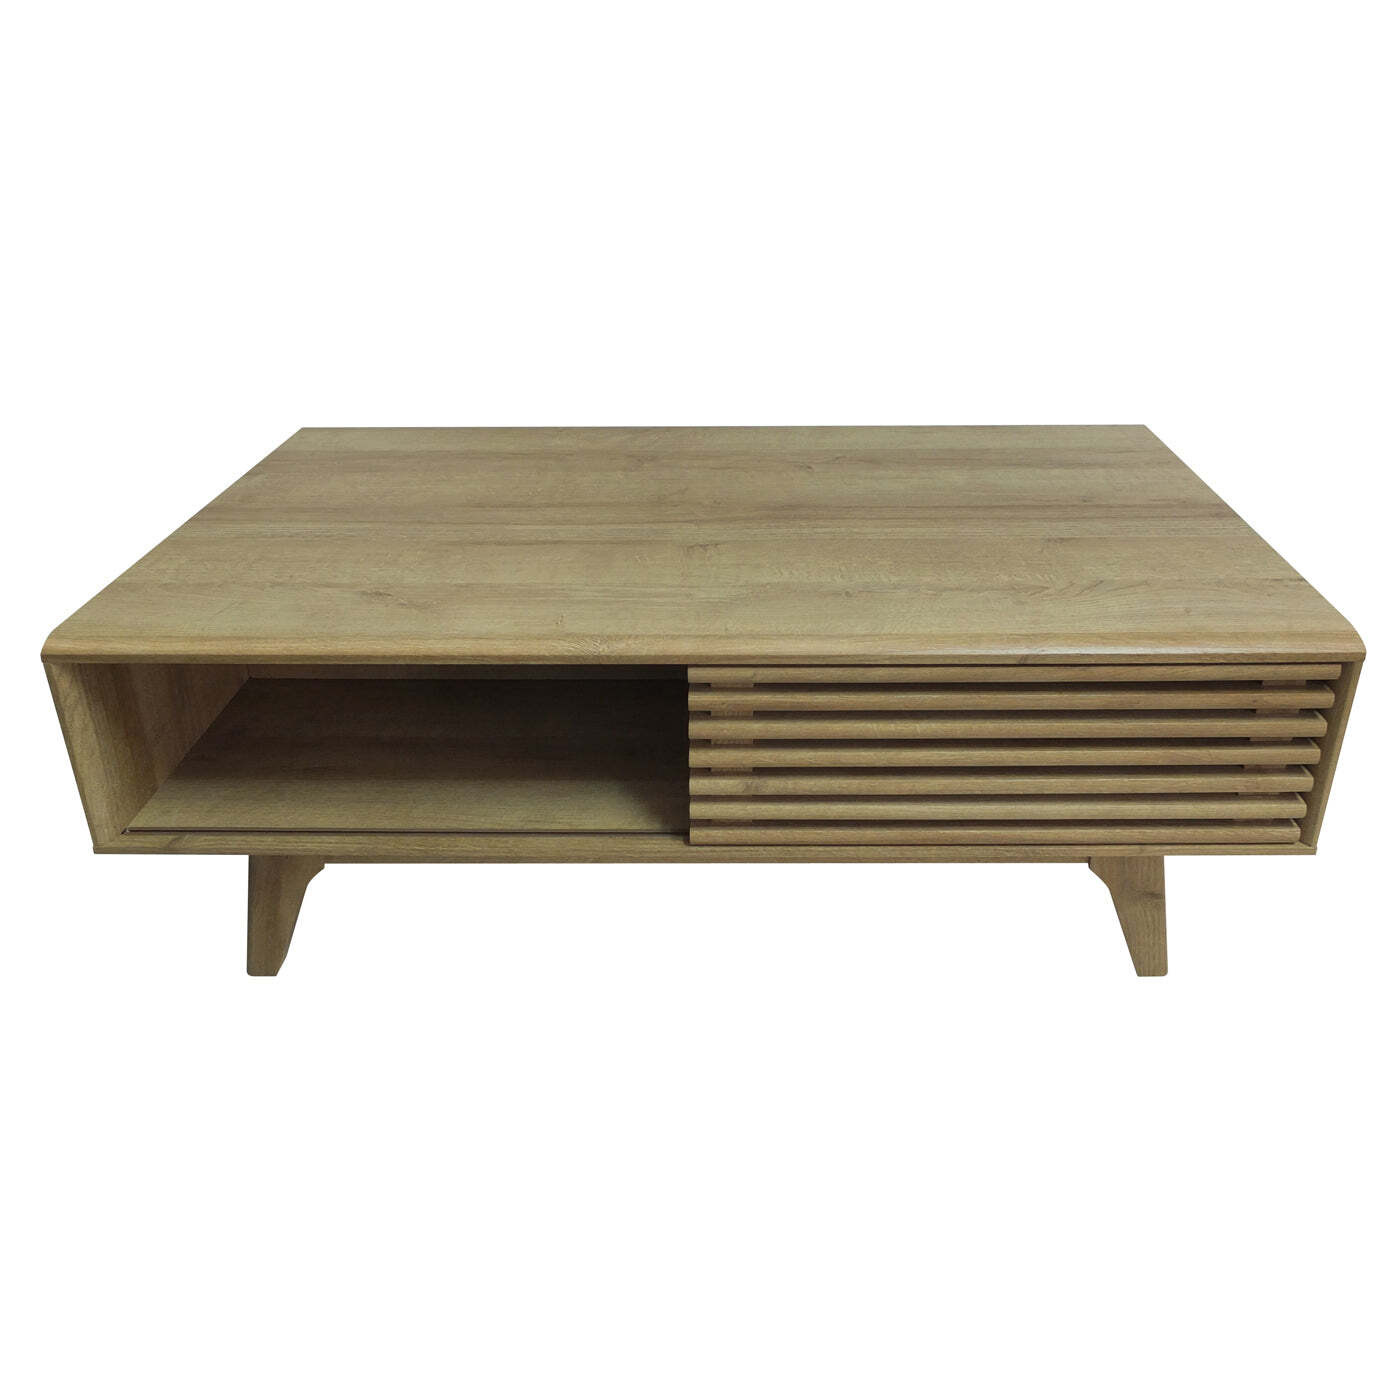 Teddy's Collection Copen Coffee Table Riviera Oak - image 1